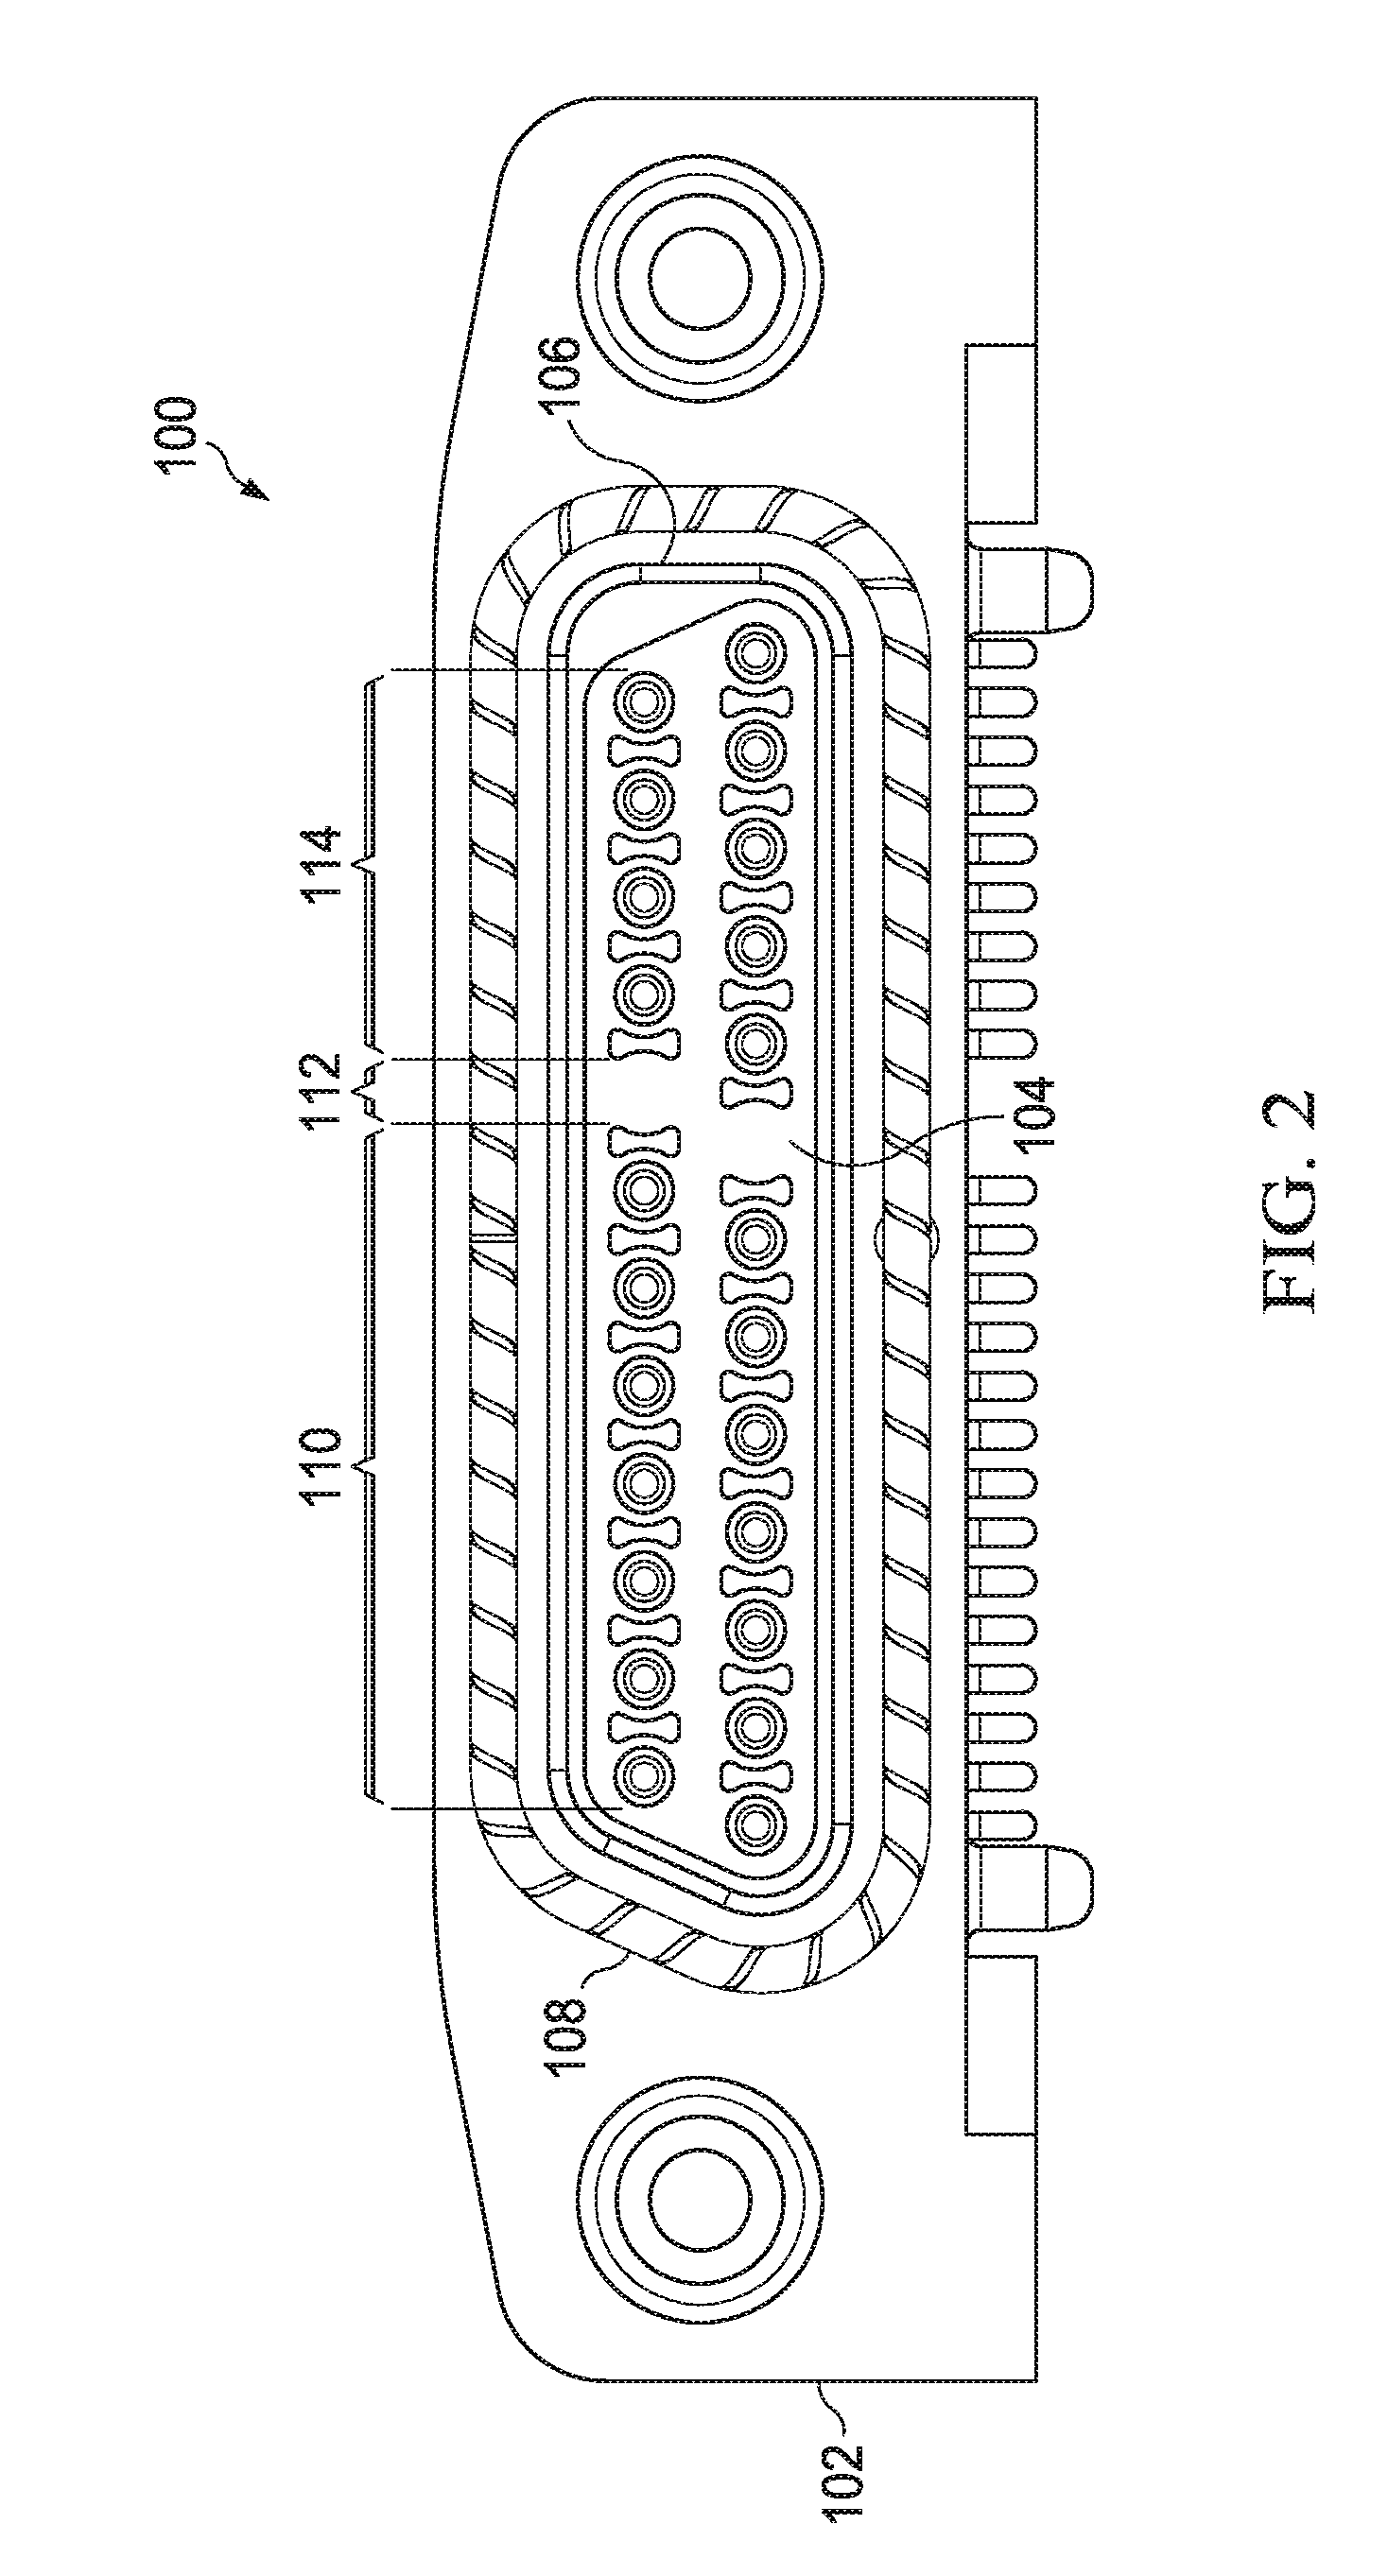 Insulator with Air Dielectric Cavities for Electrical Connector